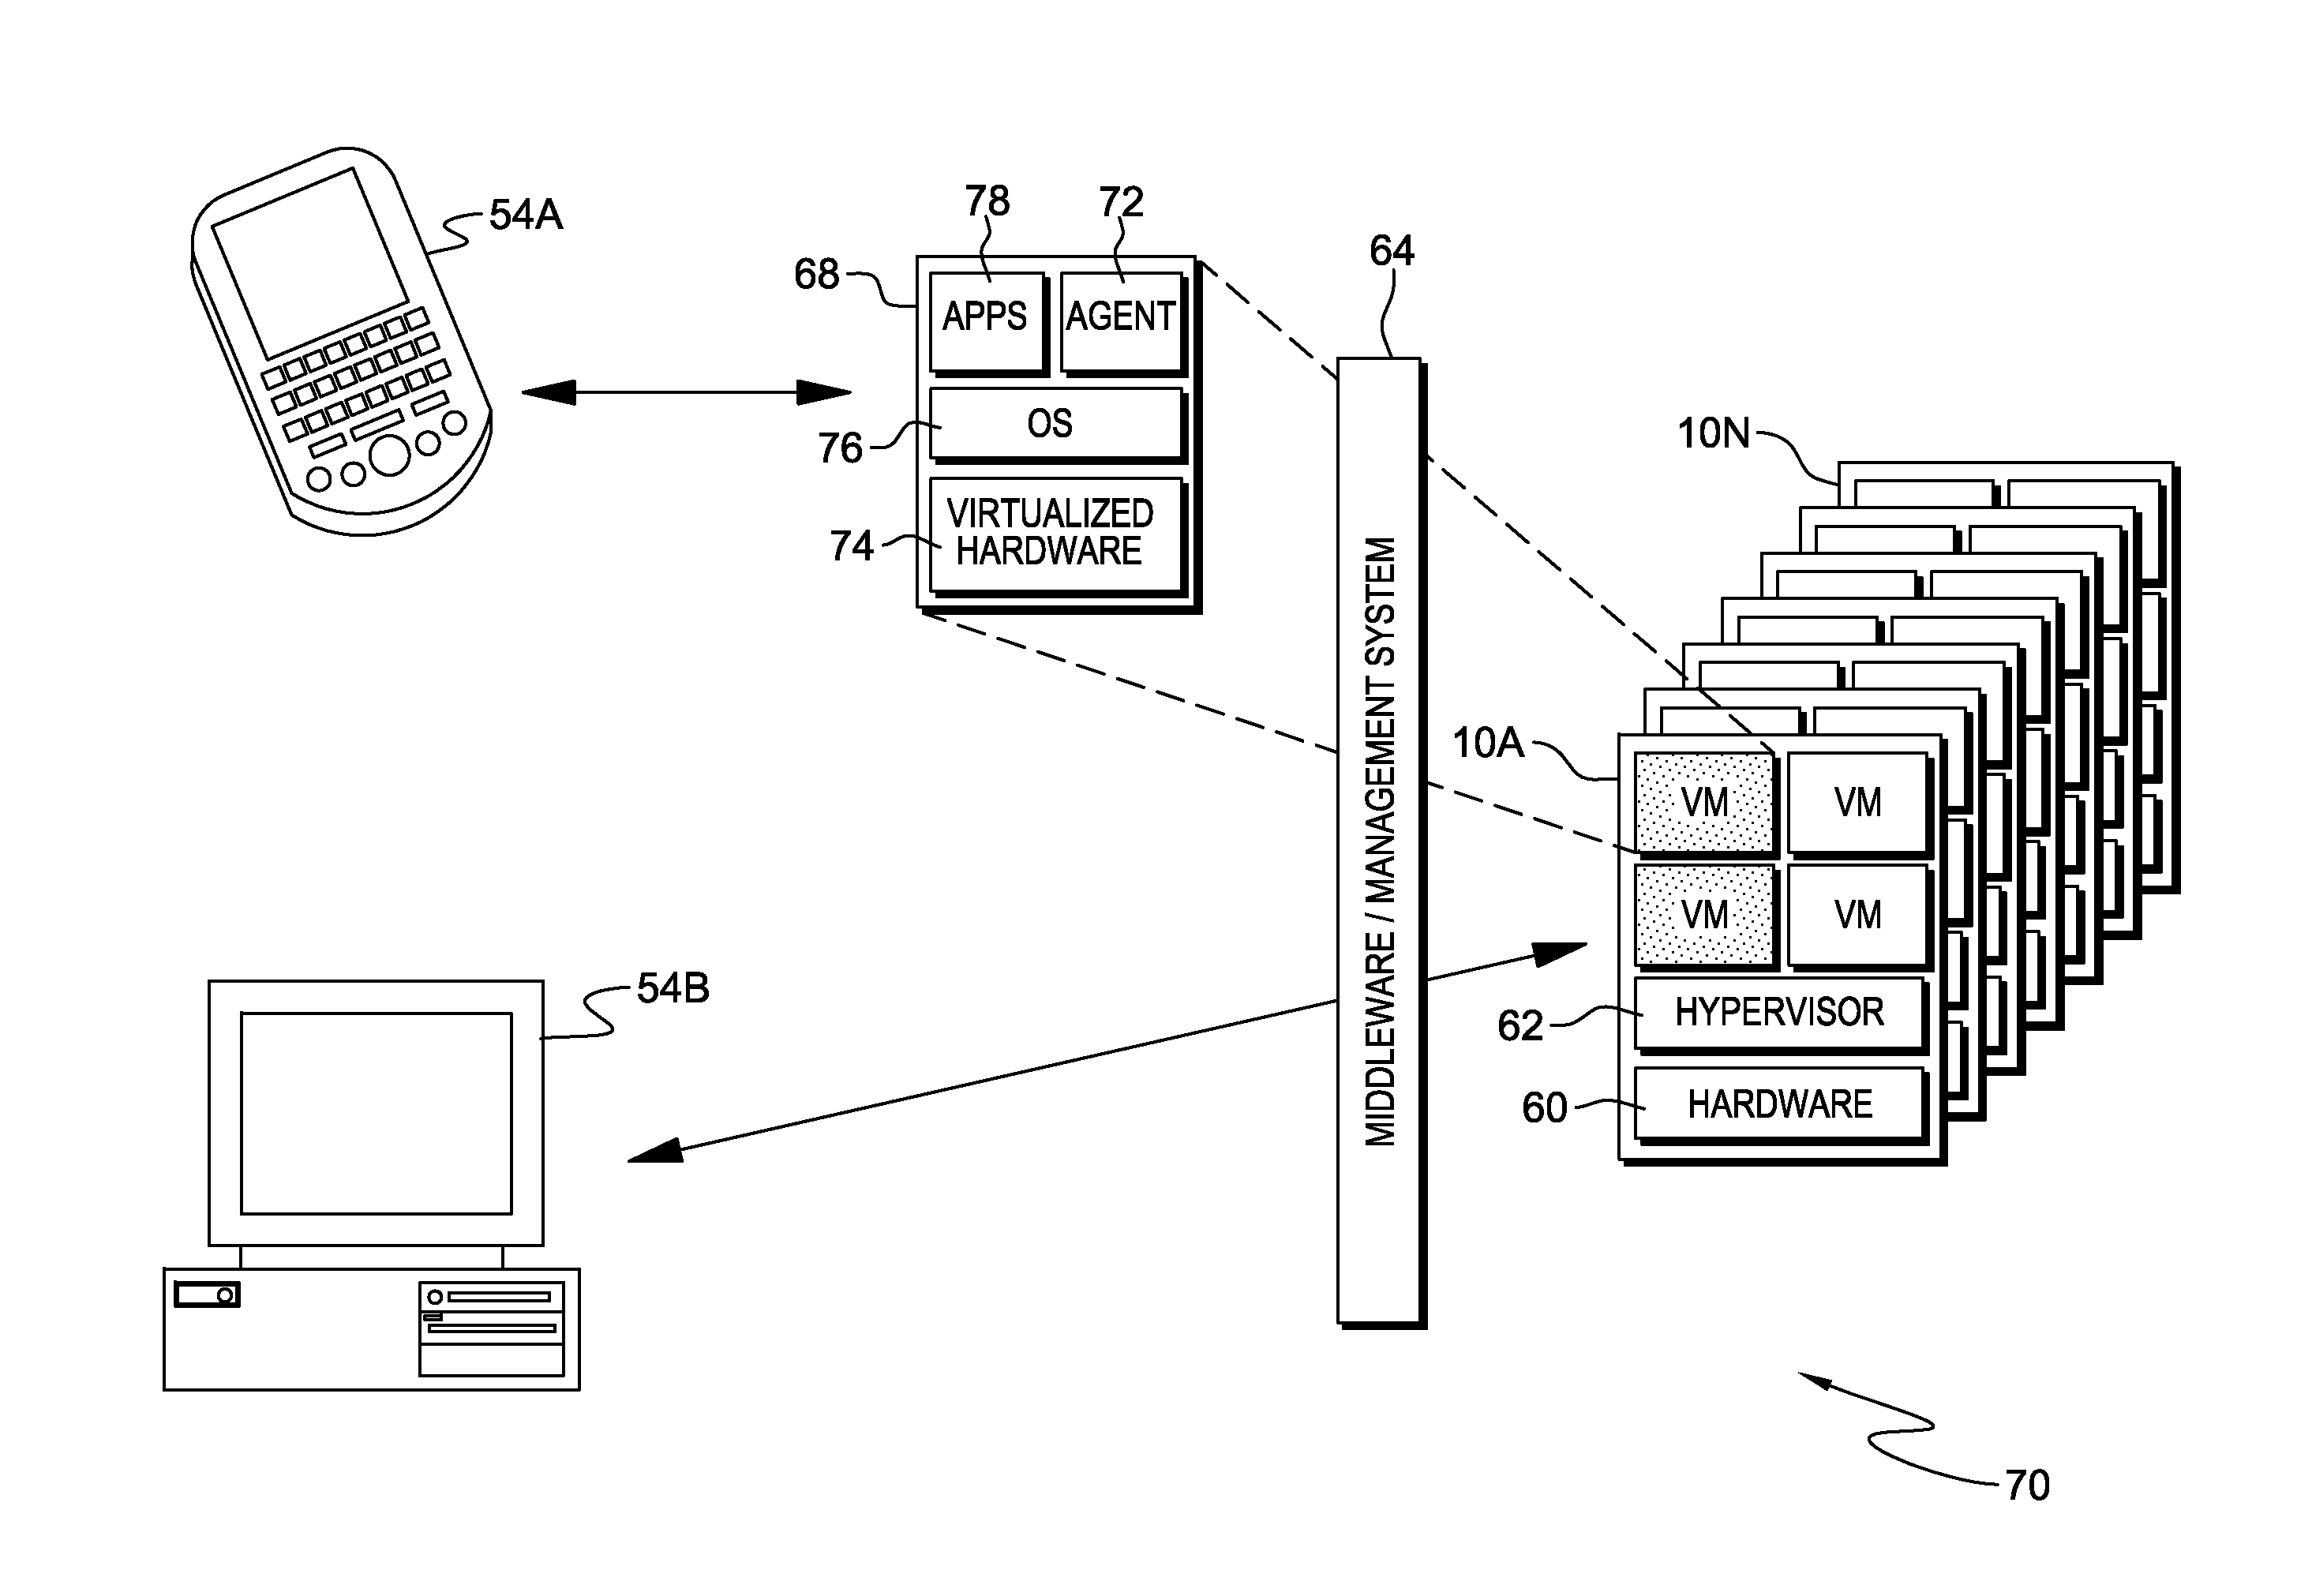 System, method and program product for optimizing virtual machine placement and configuration